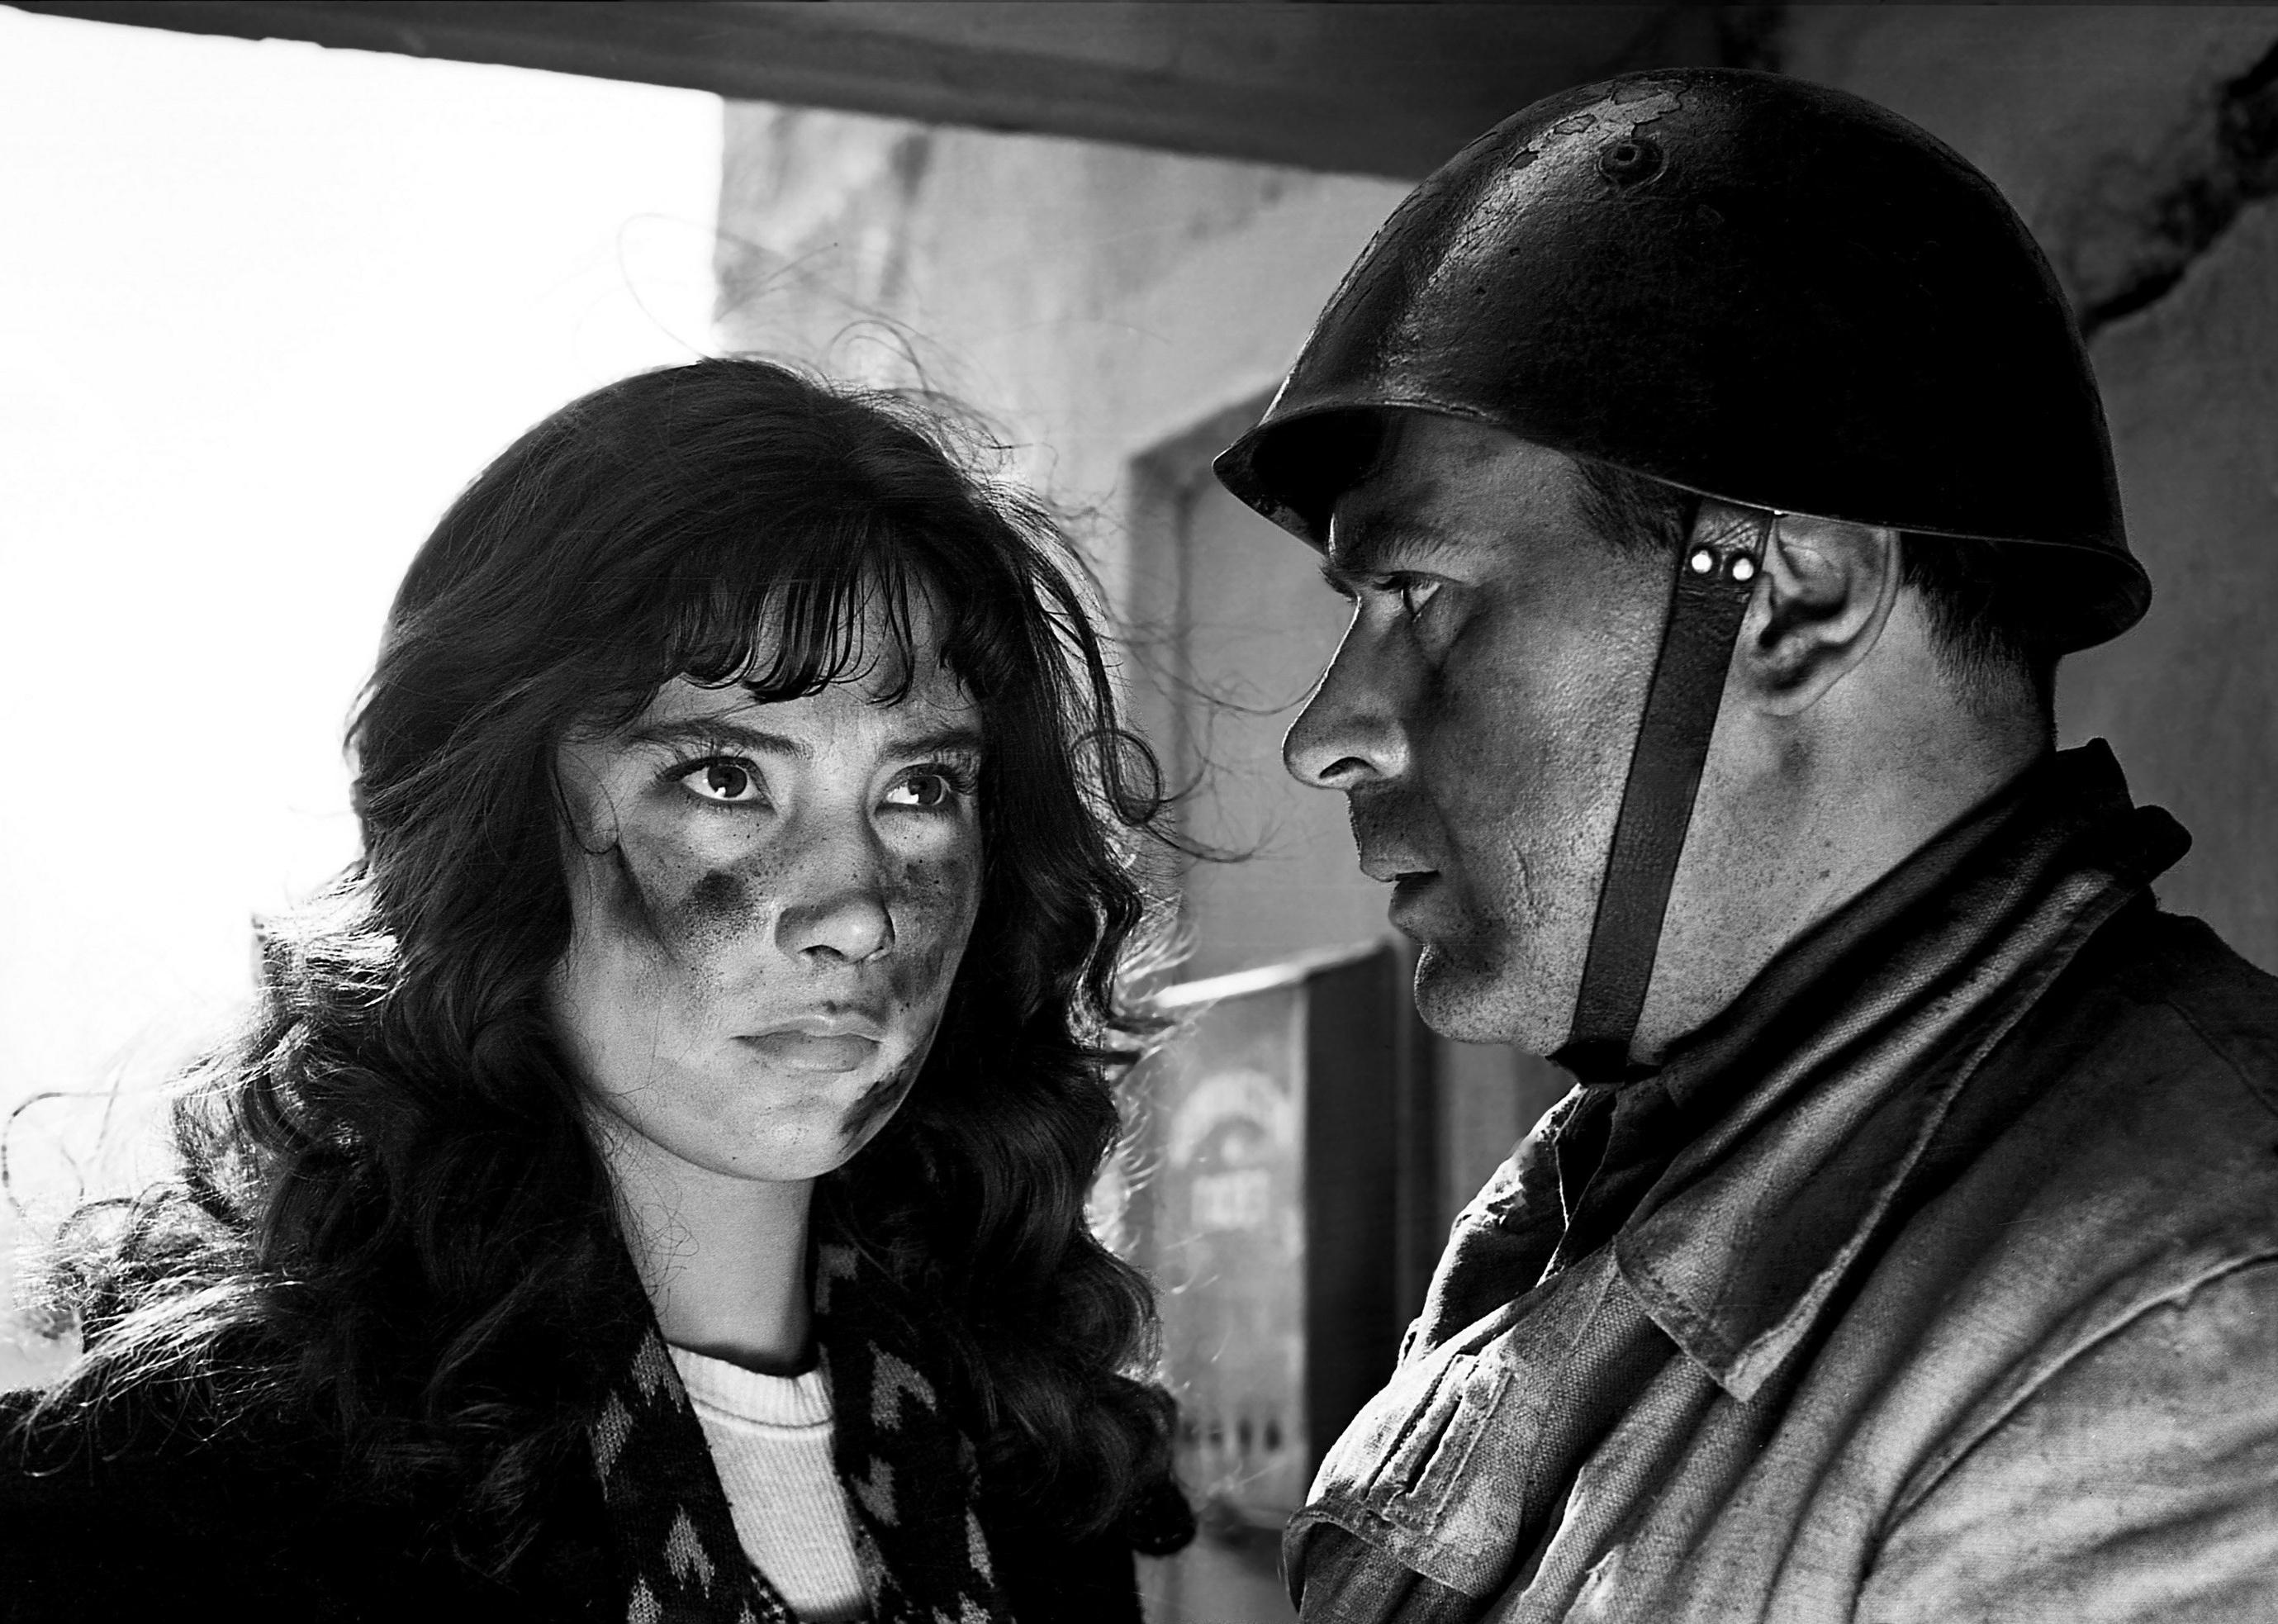 A woman with a dirty face next to a man in a military uniform and helmet.